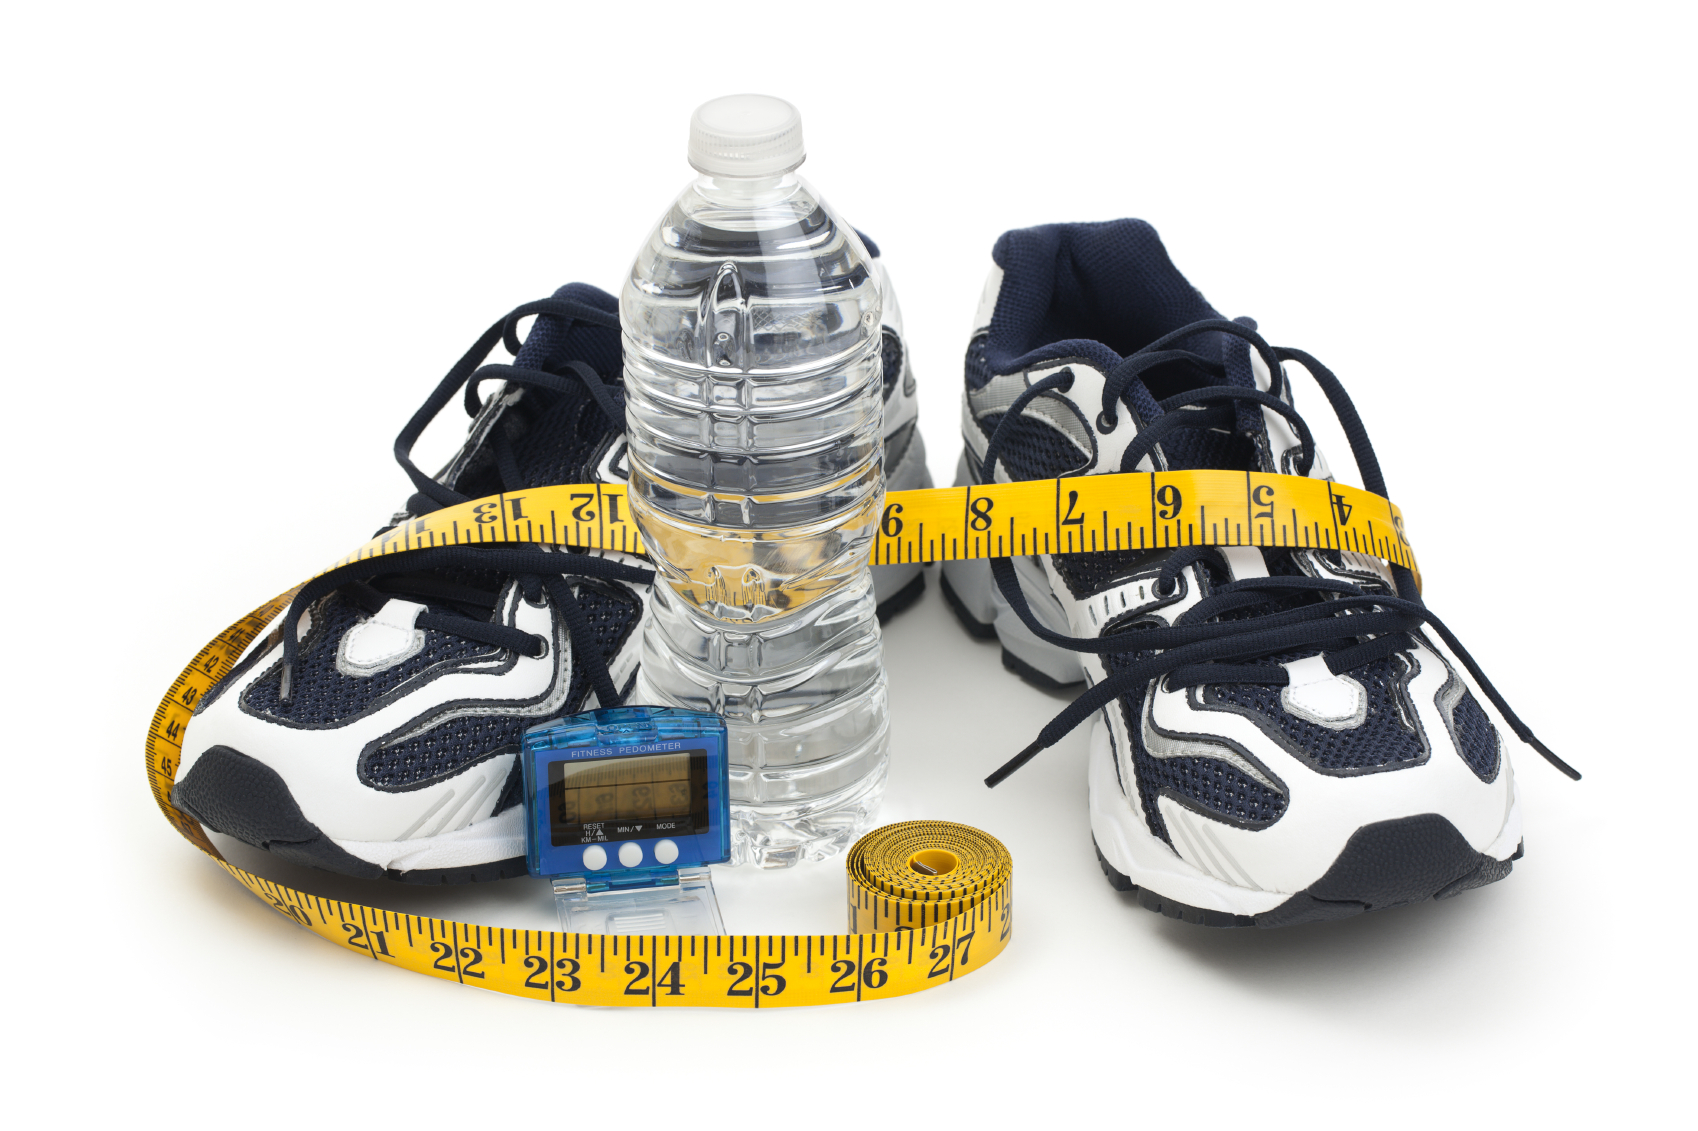 Does wearable technology help with weight loss and other health goals?